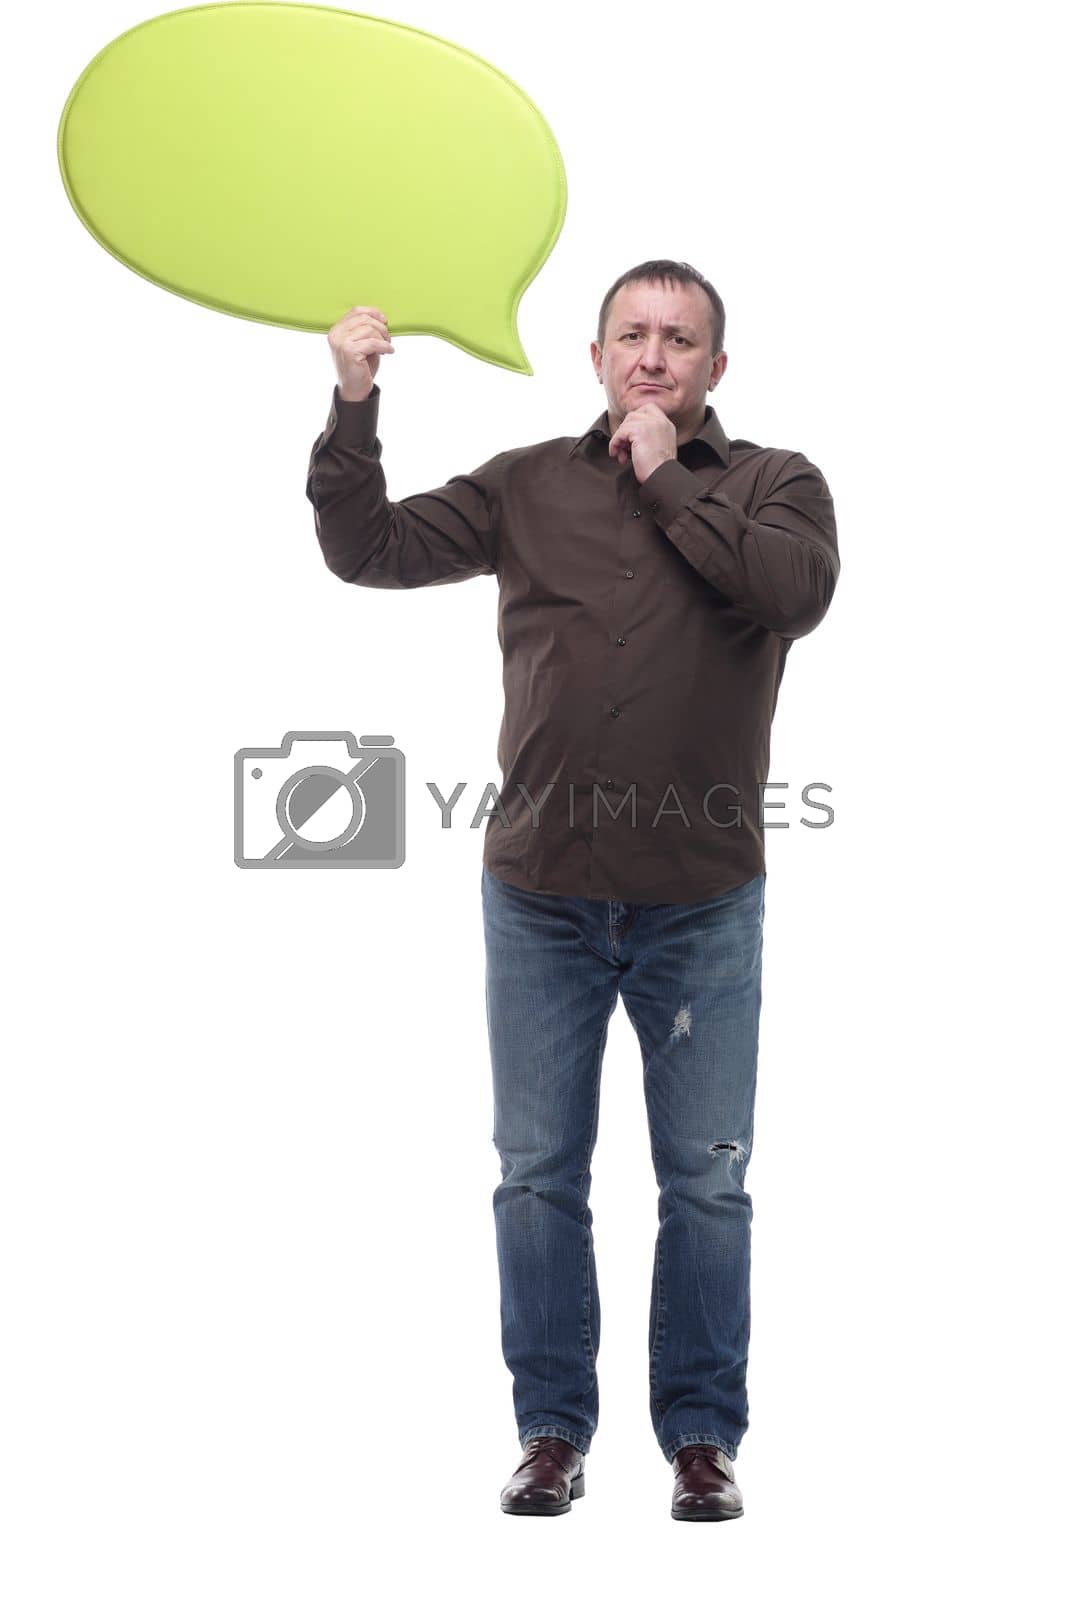 Royalty free image of in full growth. mature man with a speech bubble . by asdf